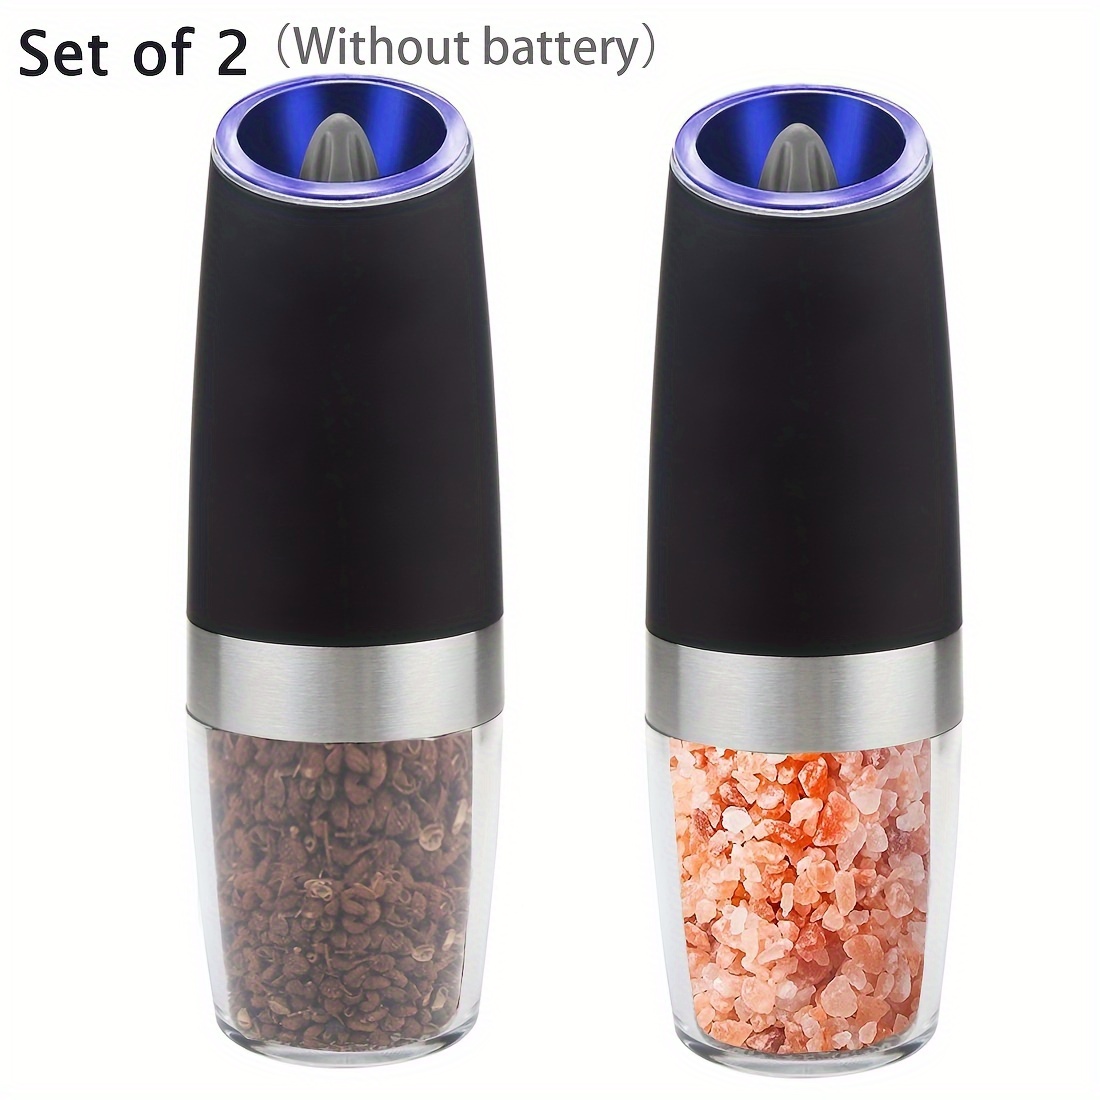 2 Pcs/Set Electric Pepper Grinder Stainless Steel Automatic